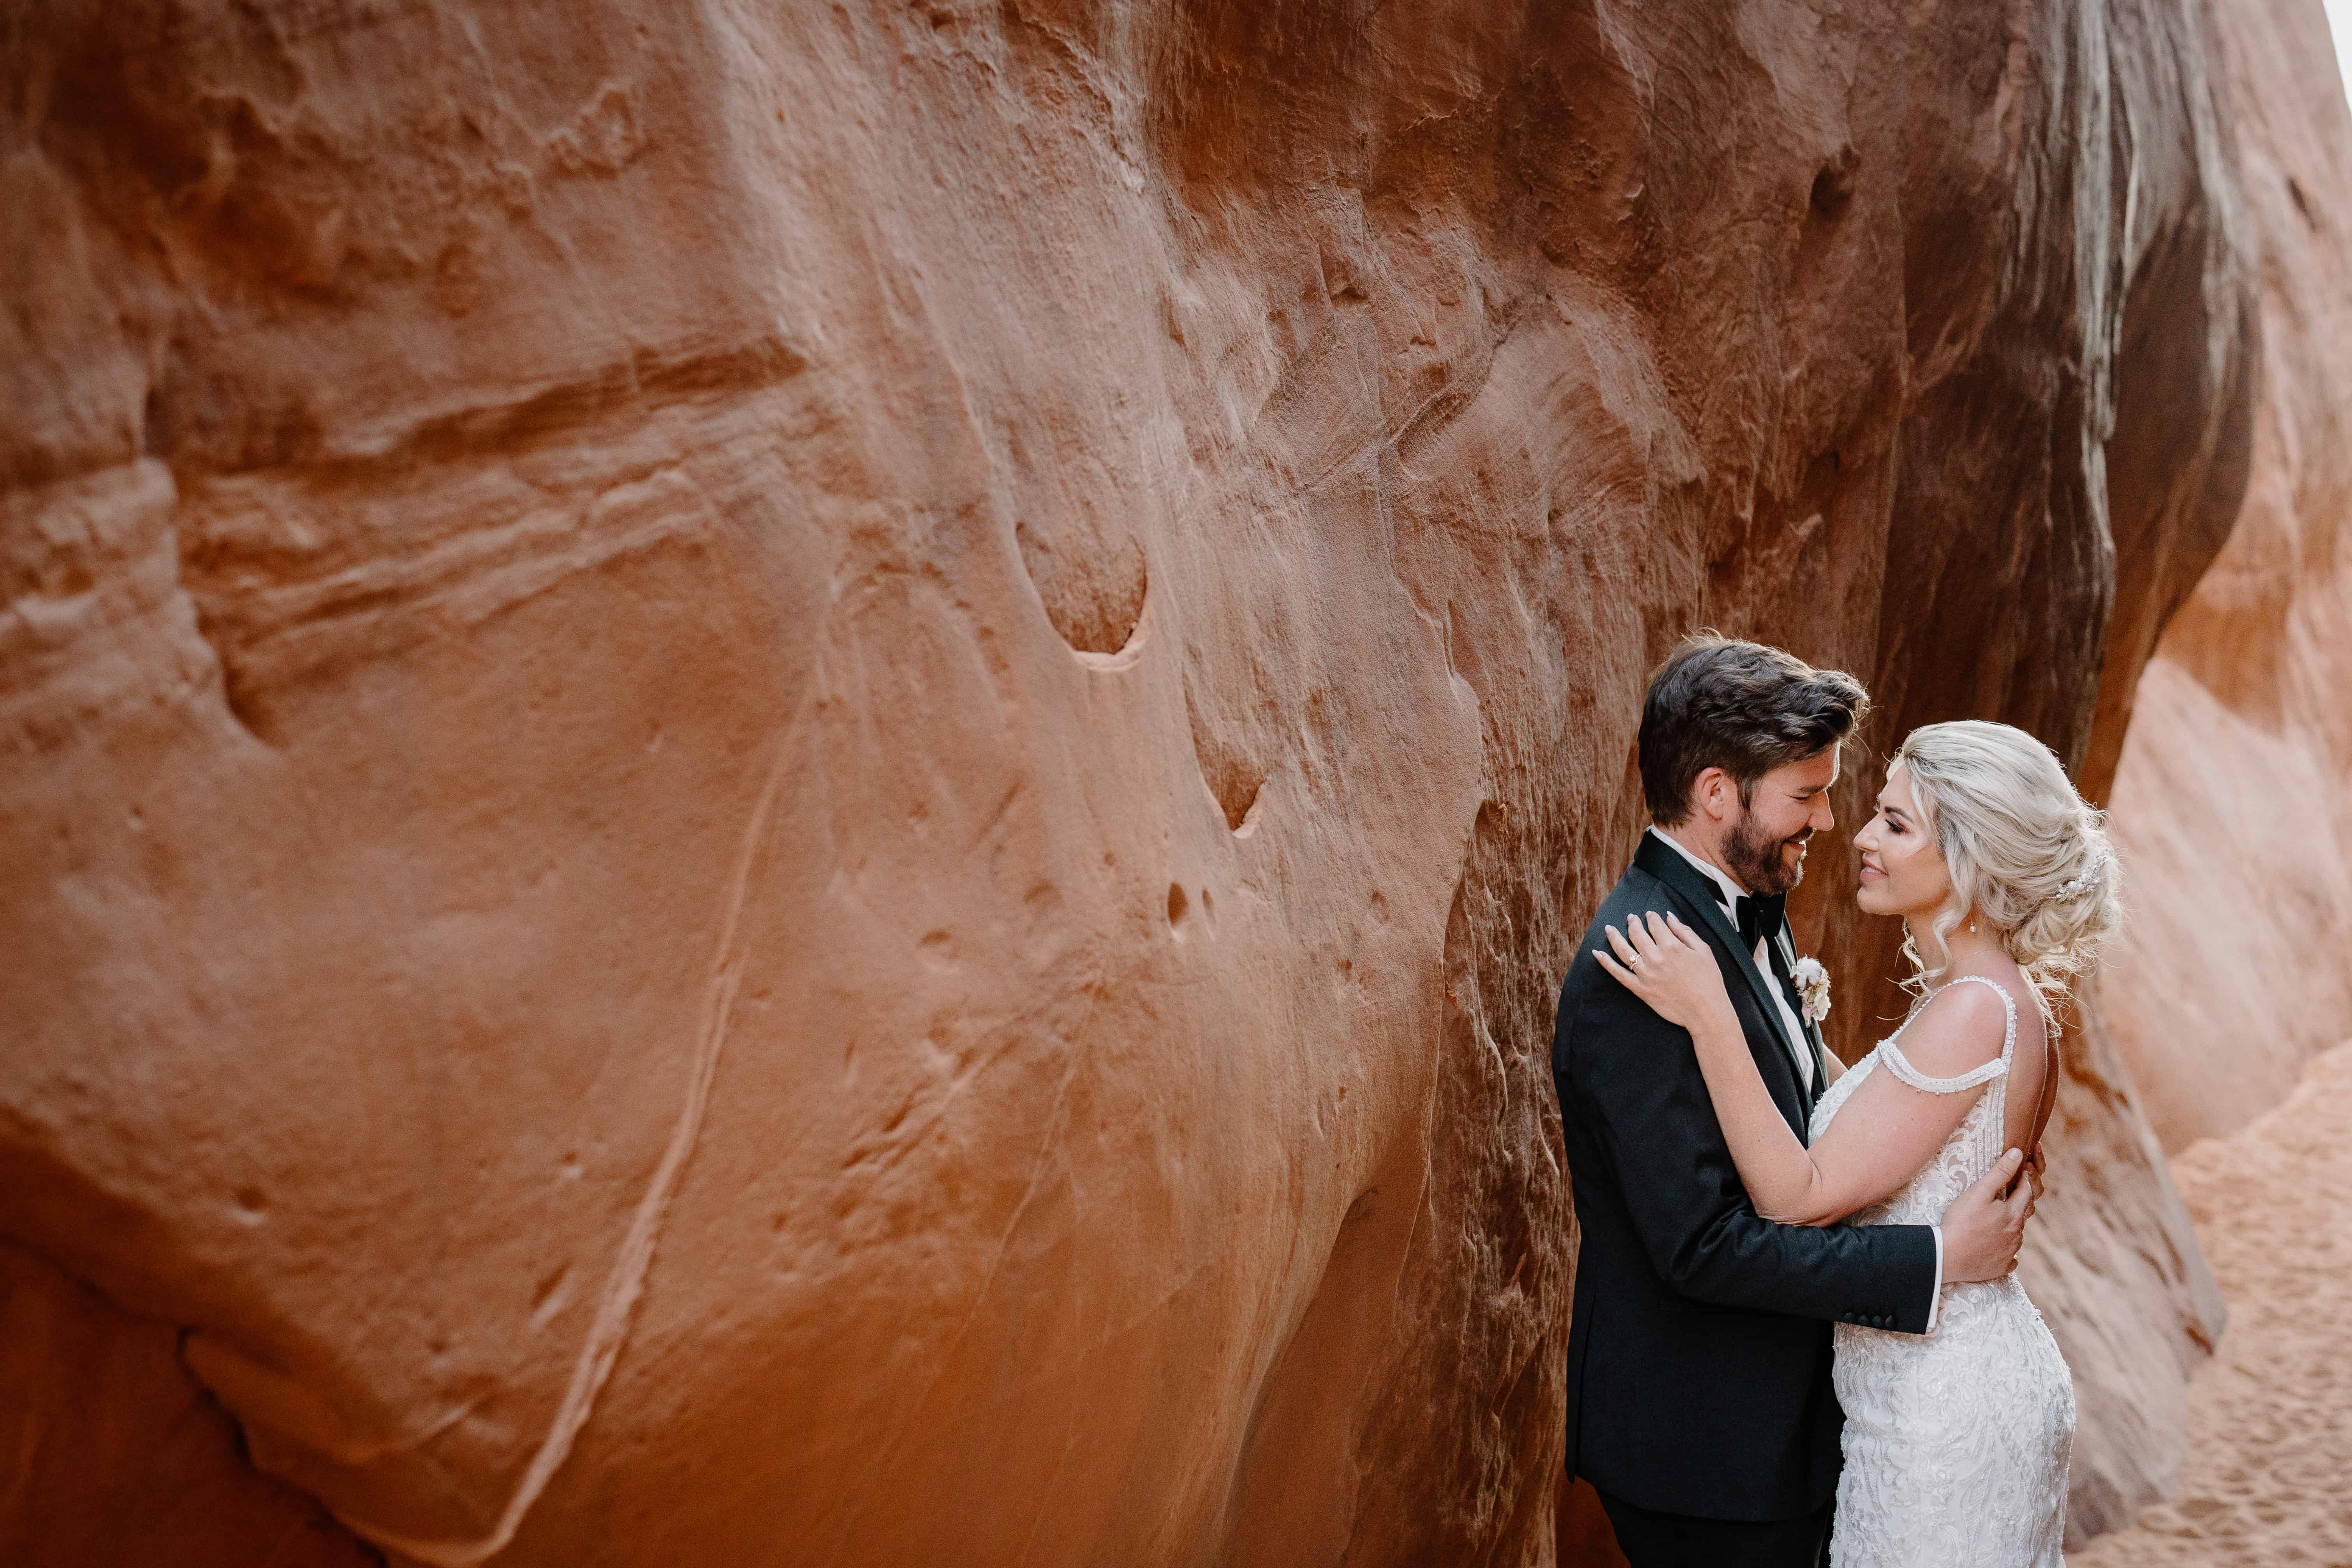 A couple holds each other close near the sand wall of an ancient arch during their Moab, Utah wedding ceremony. 